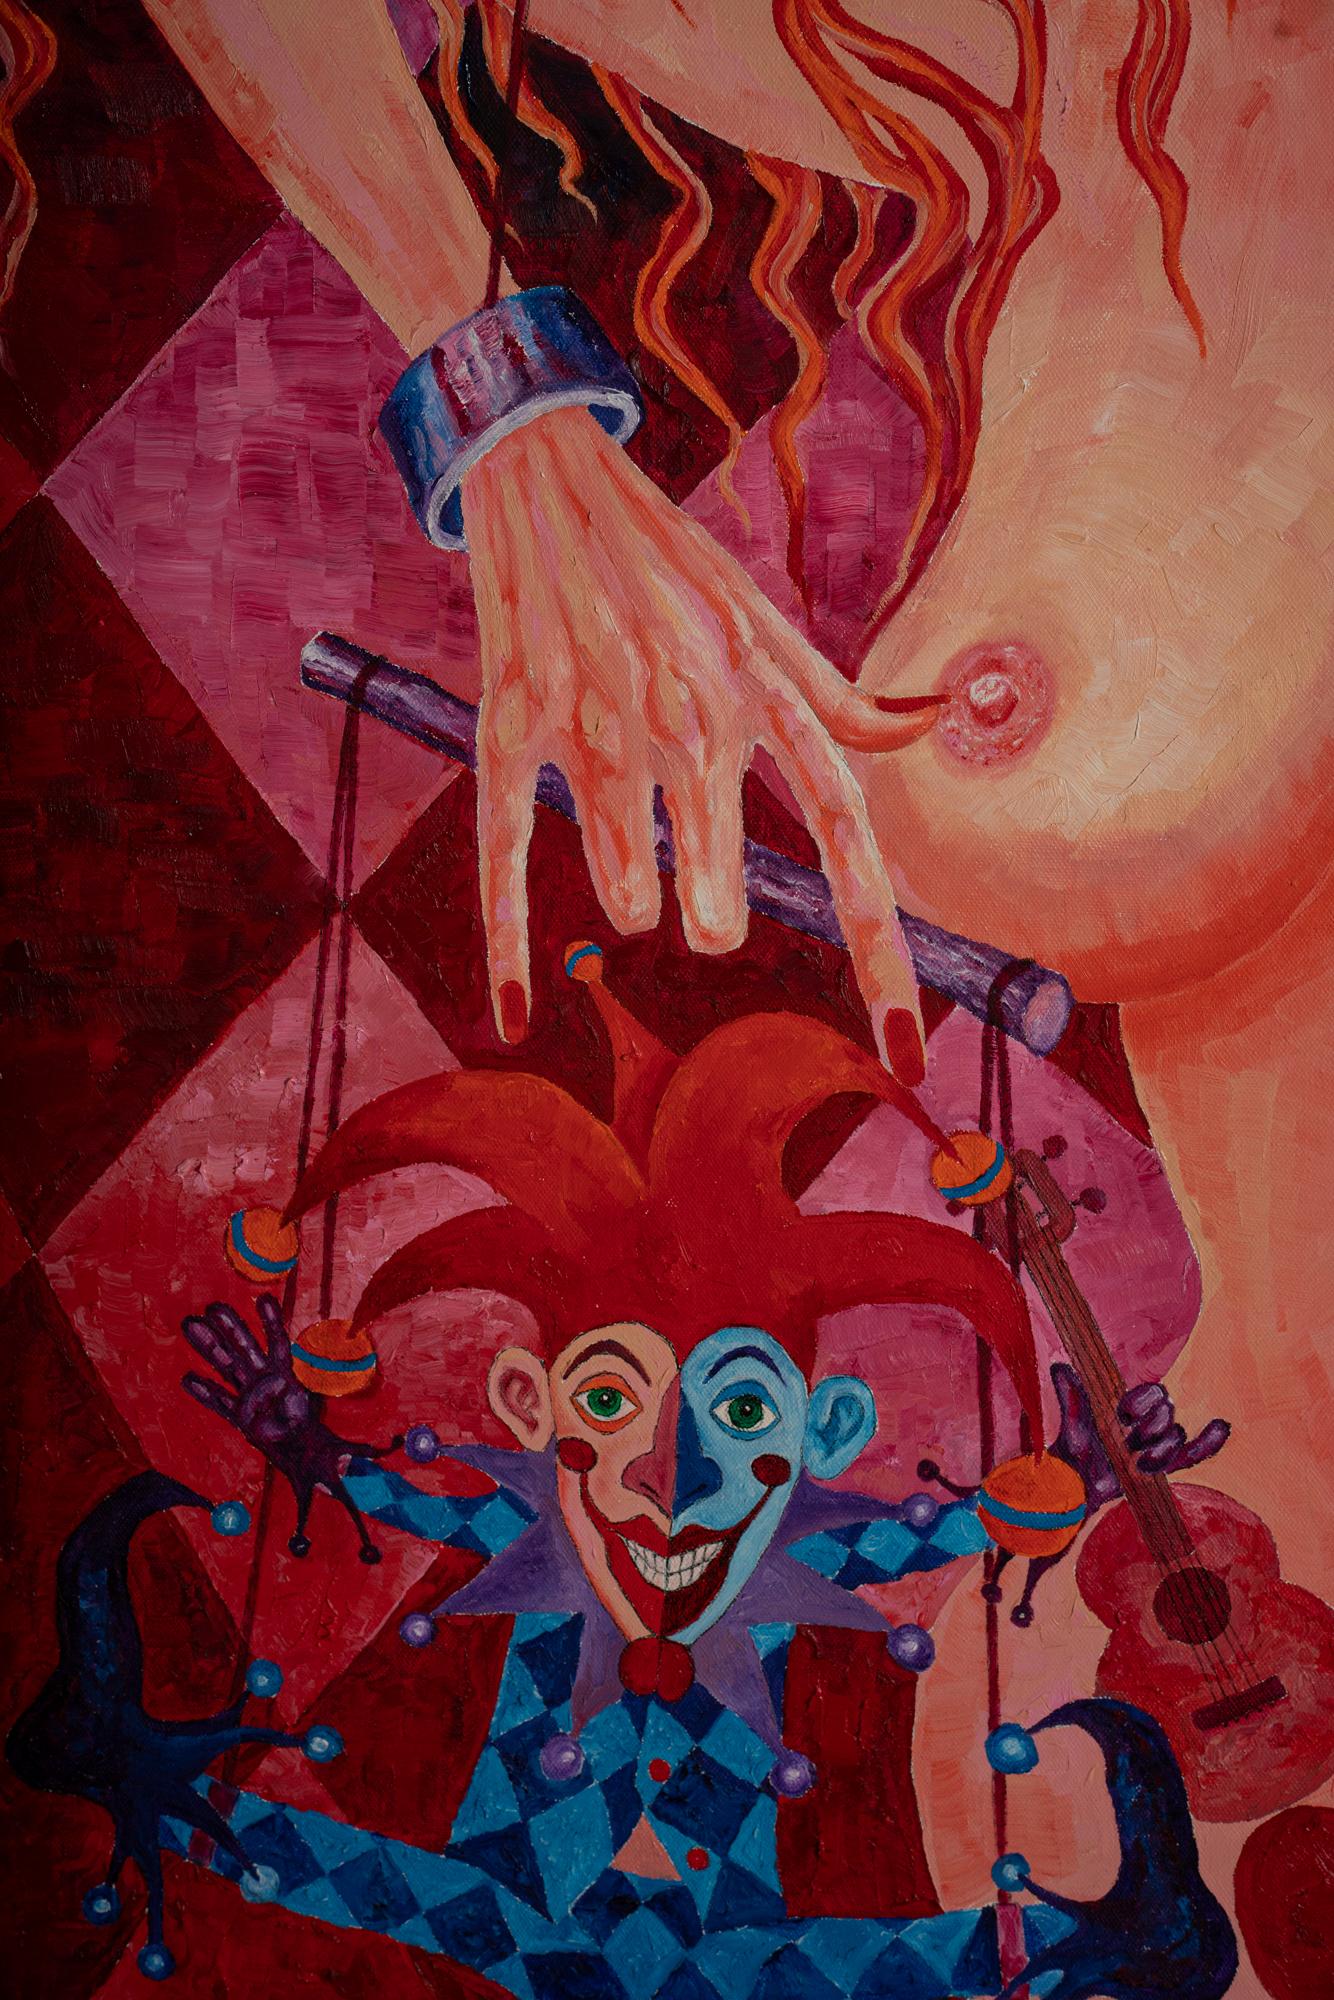 The painting is a reflection on a philosophical idea of not always having control over one’s life. The two halves of the painting suggest that the reality of what is happening may be an illusion, and the puppet master is someone else entirely. The